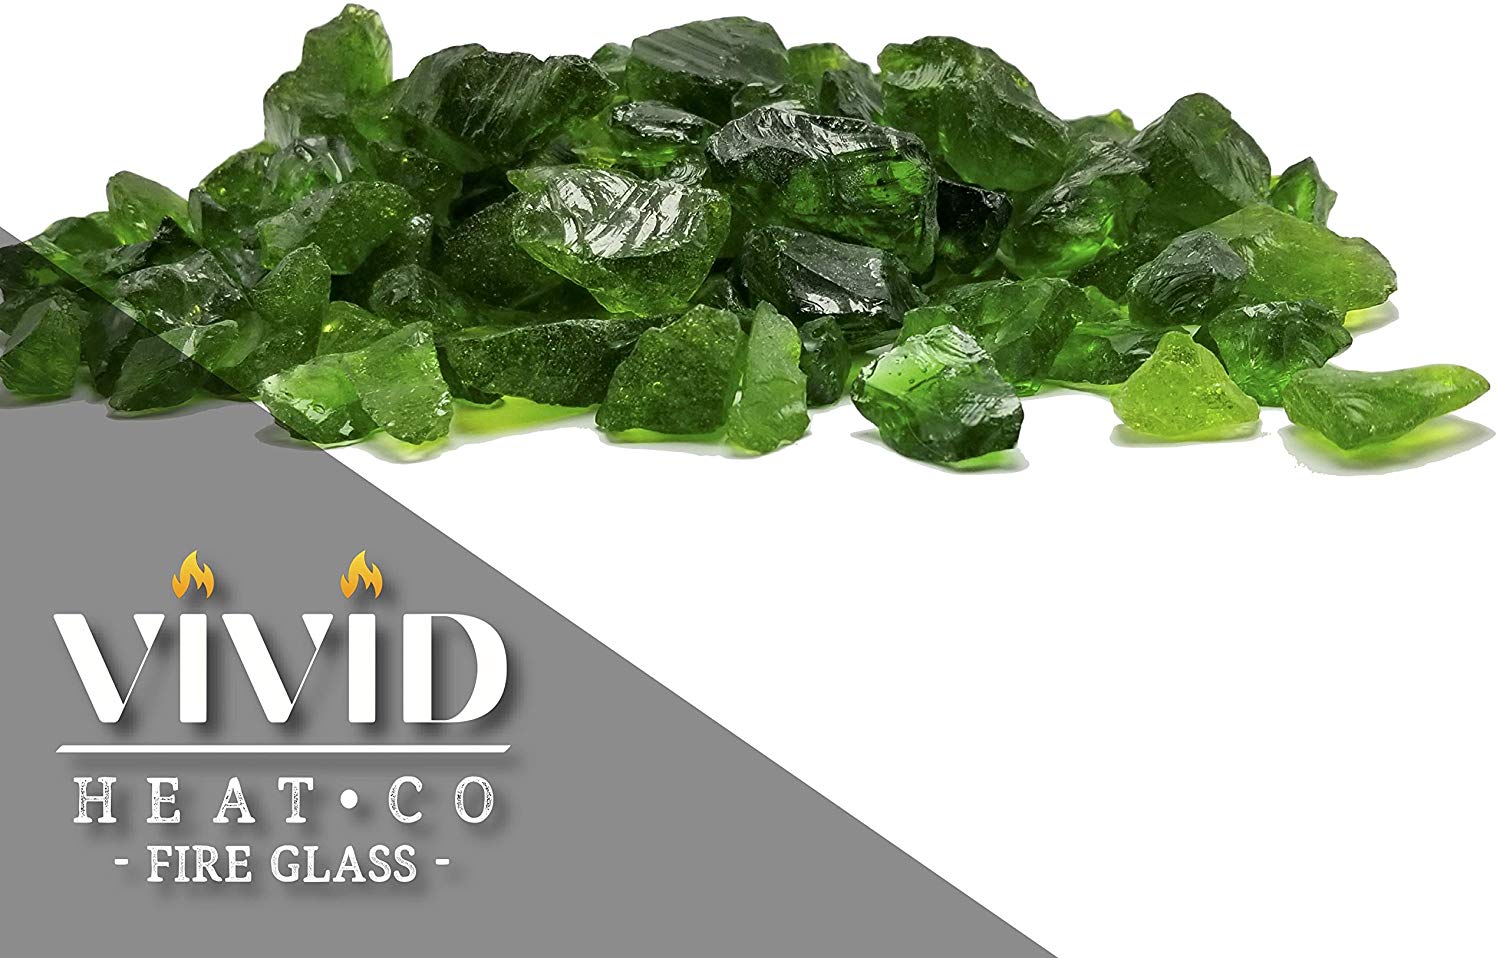 Green 1/2" - 3/4" Large Premium Fire Glass for Fireplace and Fire Pit